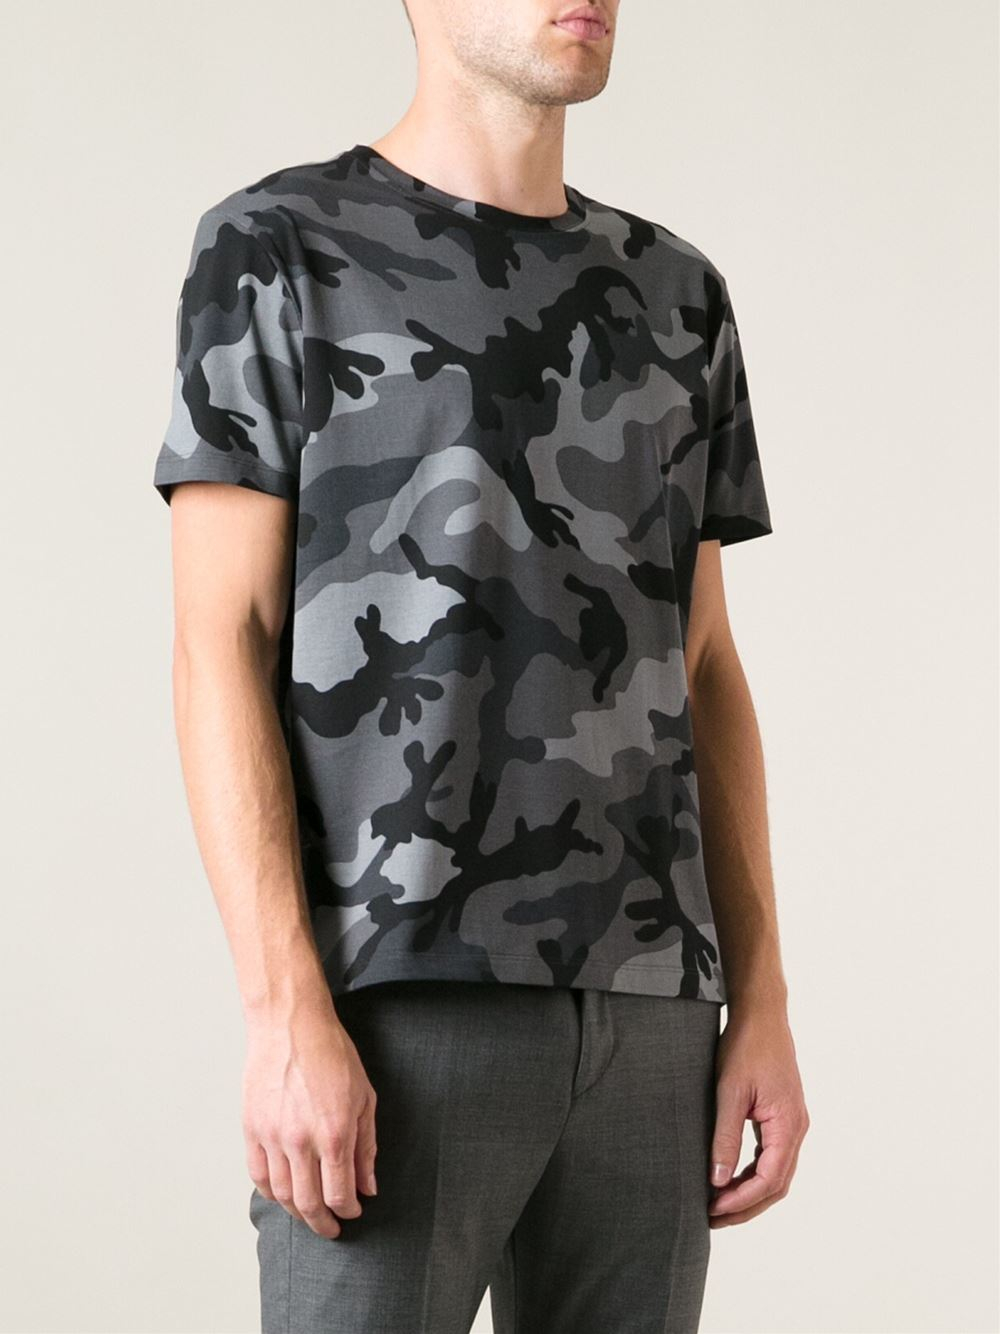 Valentino Camouflage Print Tshirt in Grey (Gray) for Men - Lyst